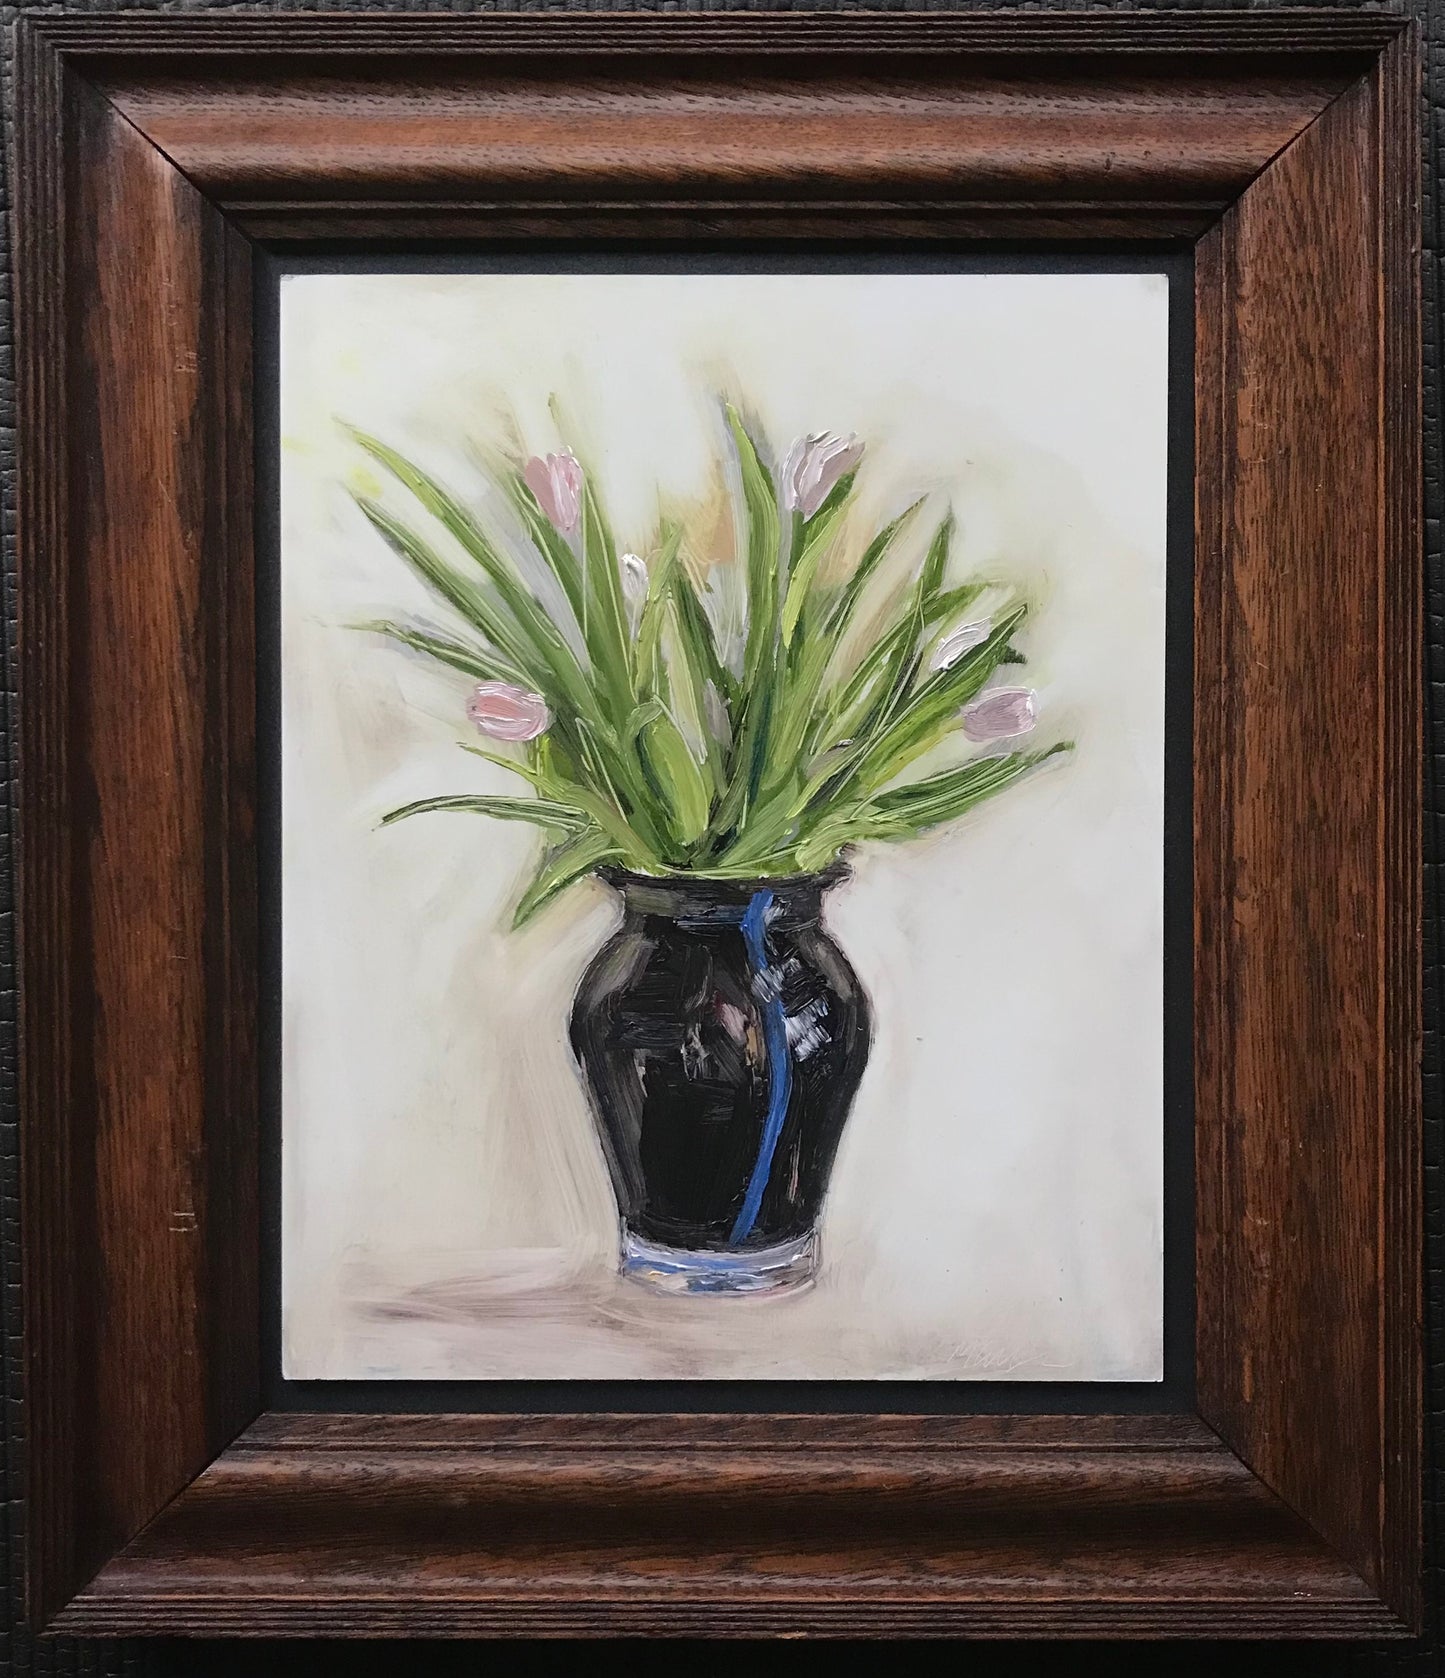 Tulips in Balck Vase with Blue Stripe, January 21st, 2023